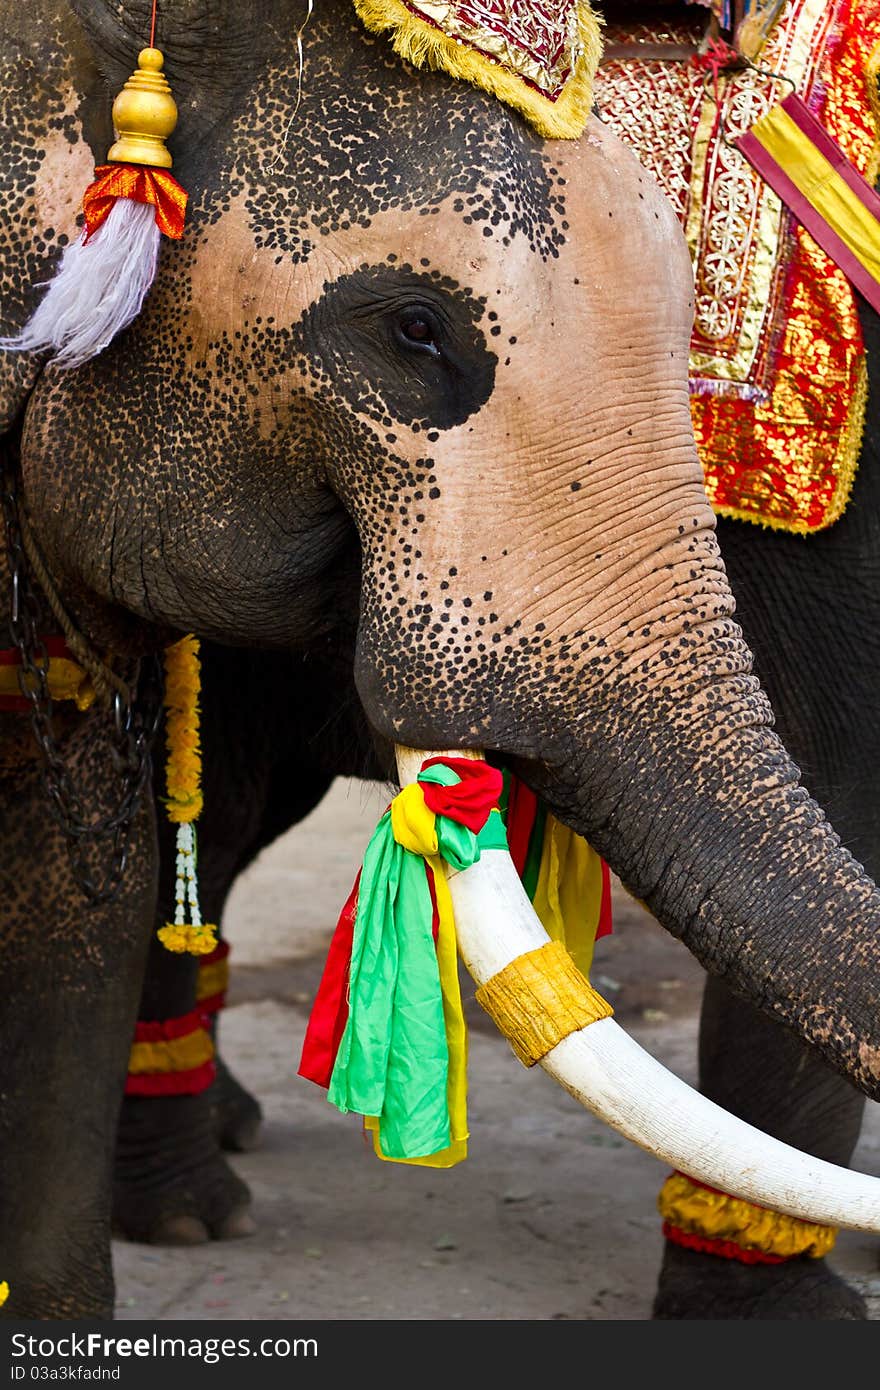 Elephant close up in lopburi of Thailand